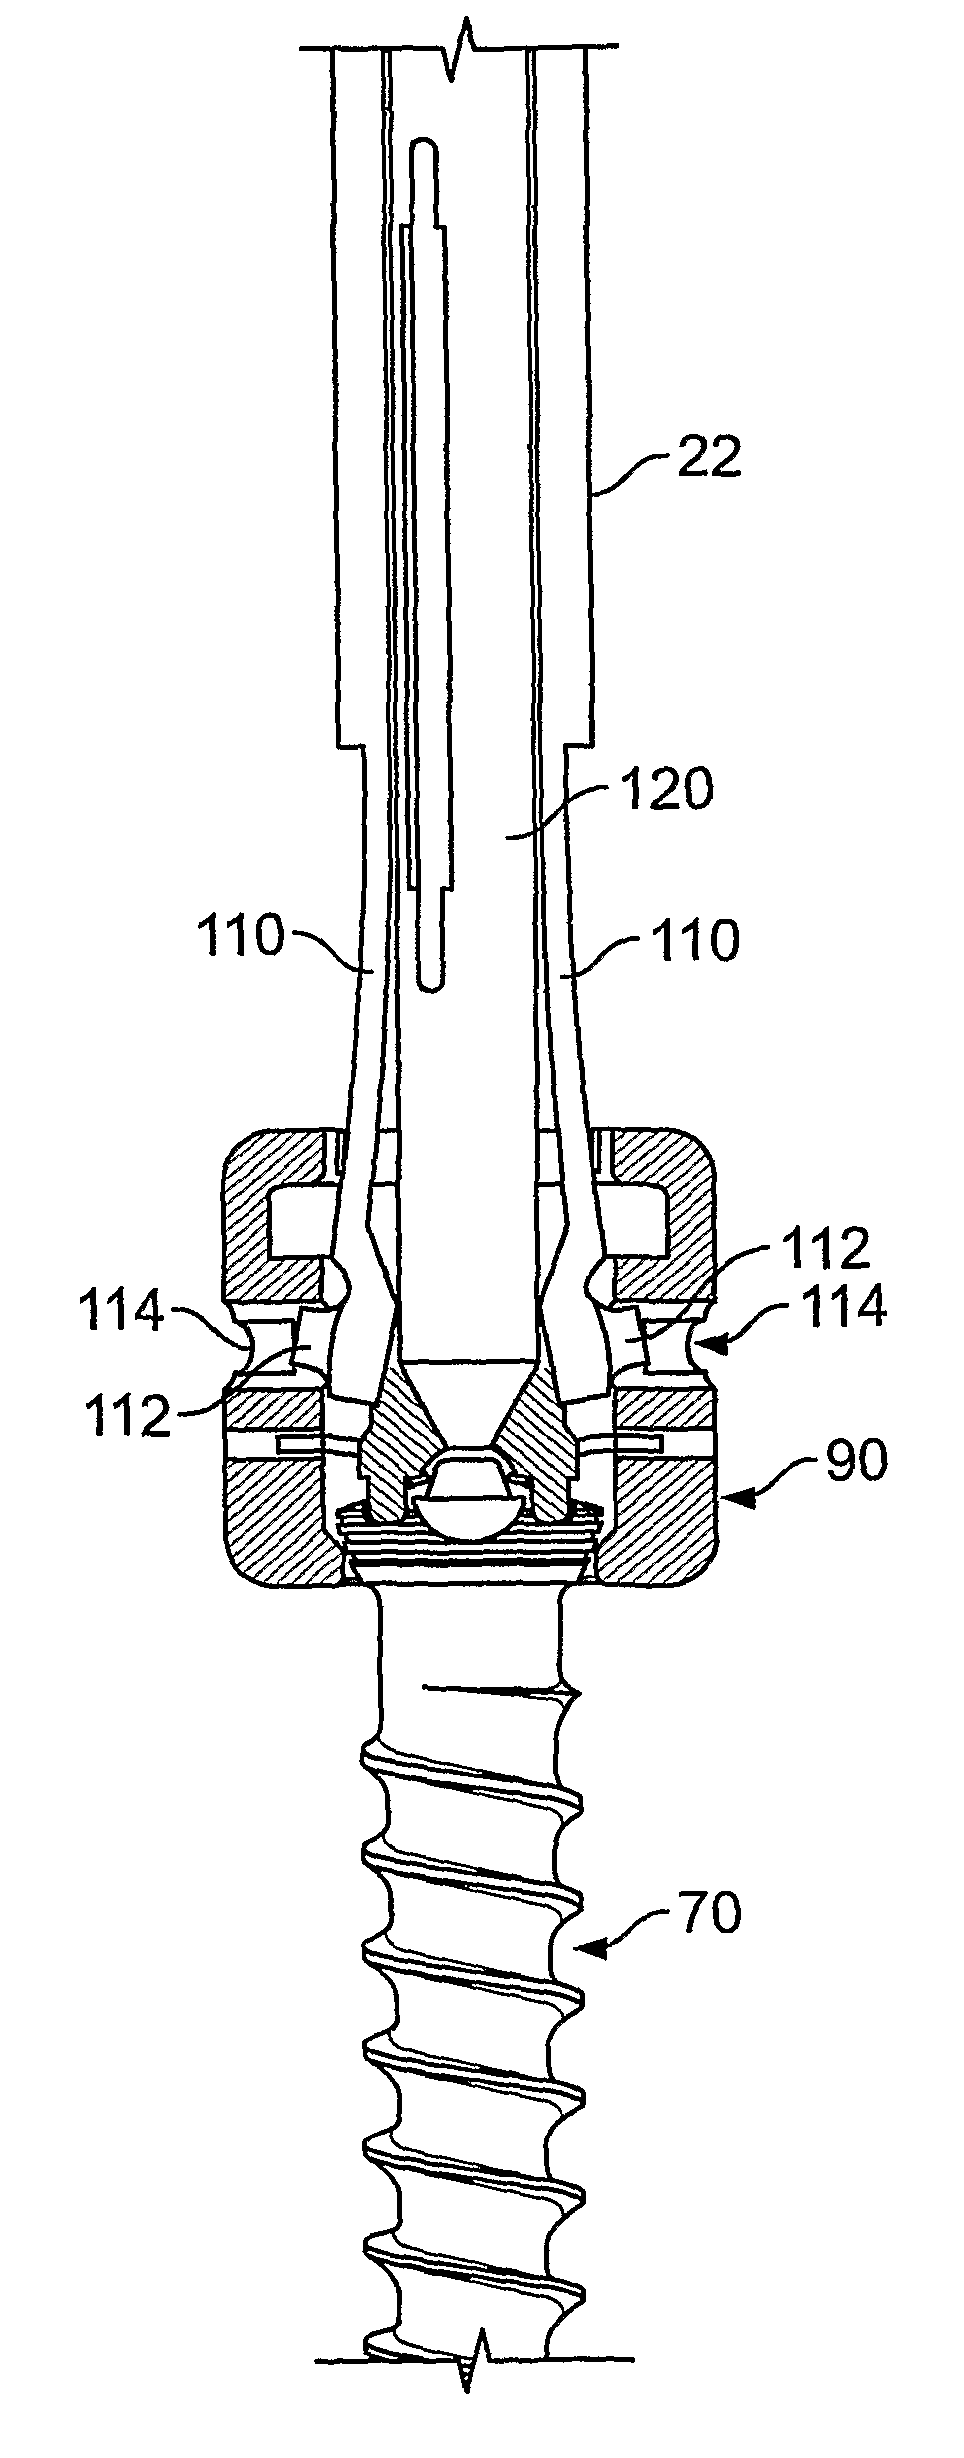 Apparatus and method for implantation of surgical devices